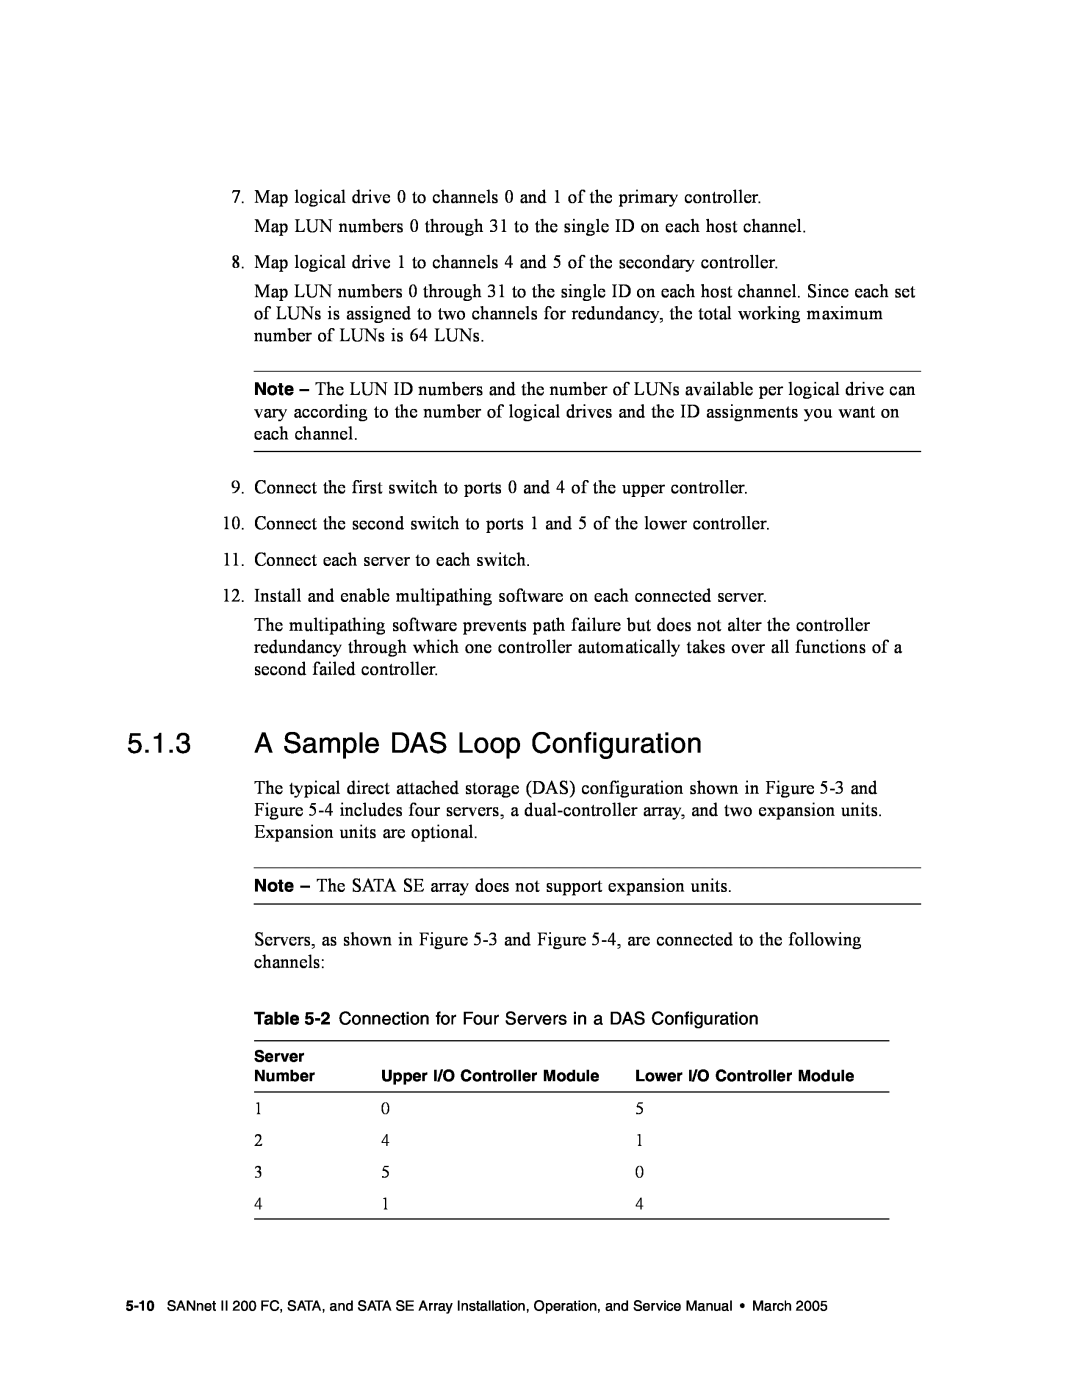 Dot Hill Systems II 200 FC service manual A Sample DAS Loop Configuration 